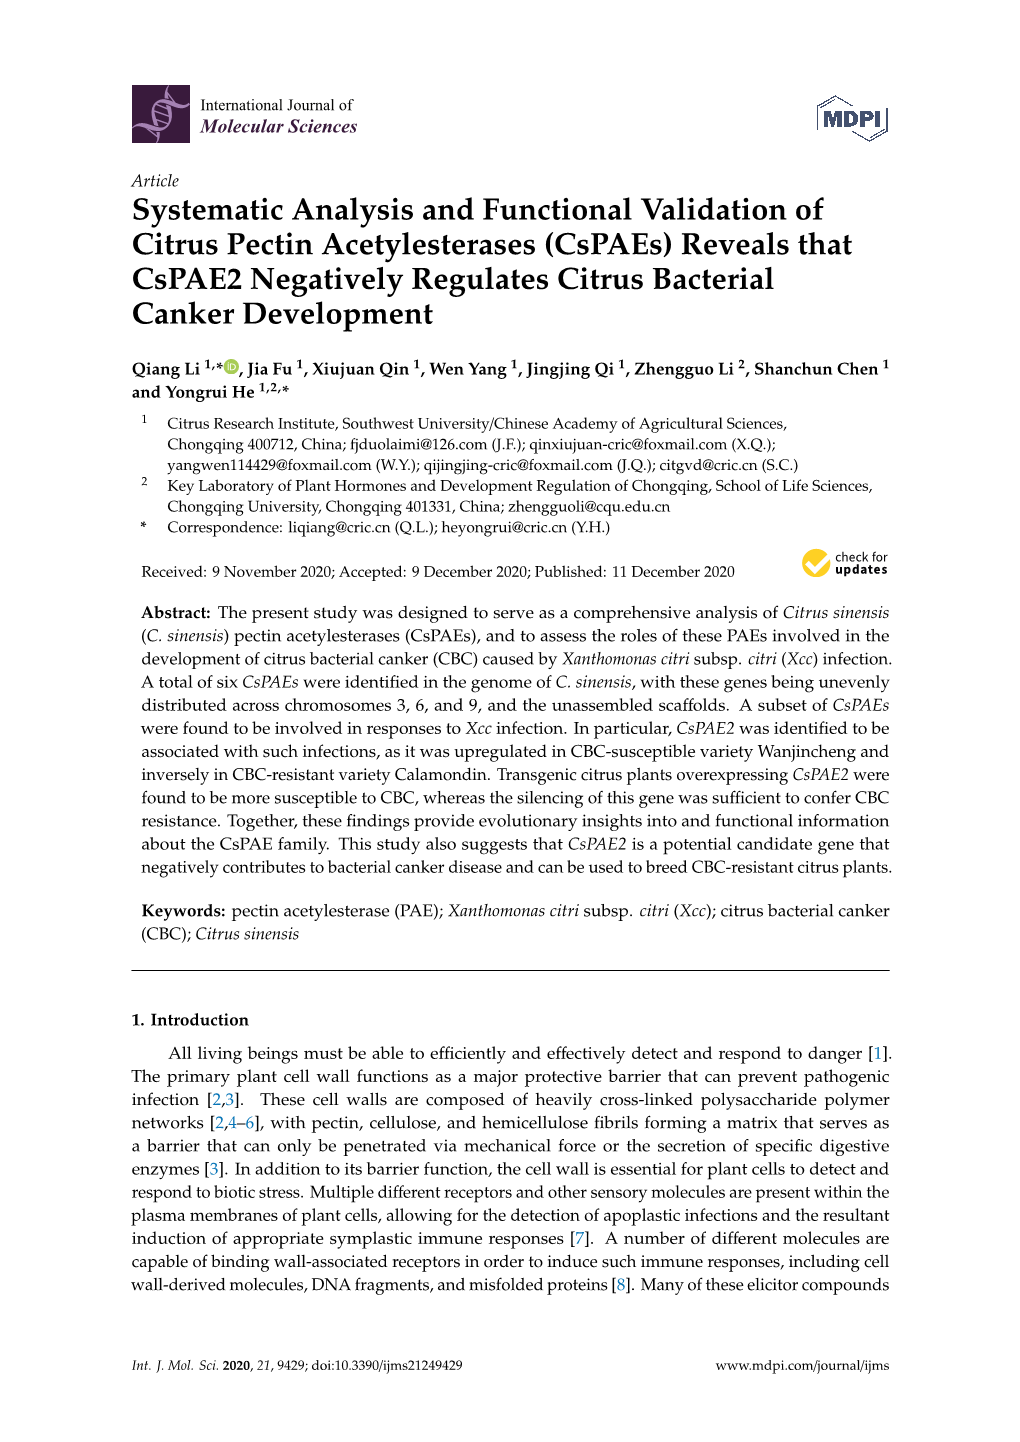 Systematic Analysis and Functional Validation of Citrus Pectin Acetylesterases (Cspaes) Reveals That Cspae2 Negatively Regulates Citrus Bacterial Canker Development